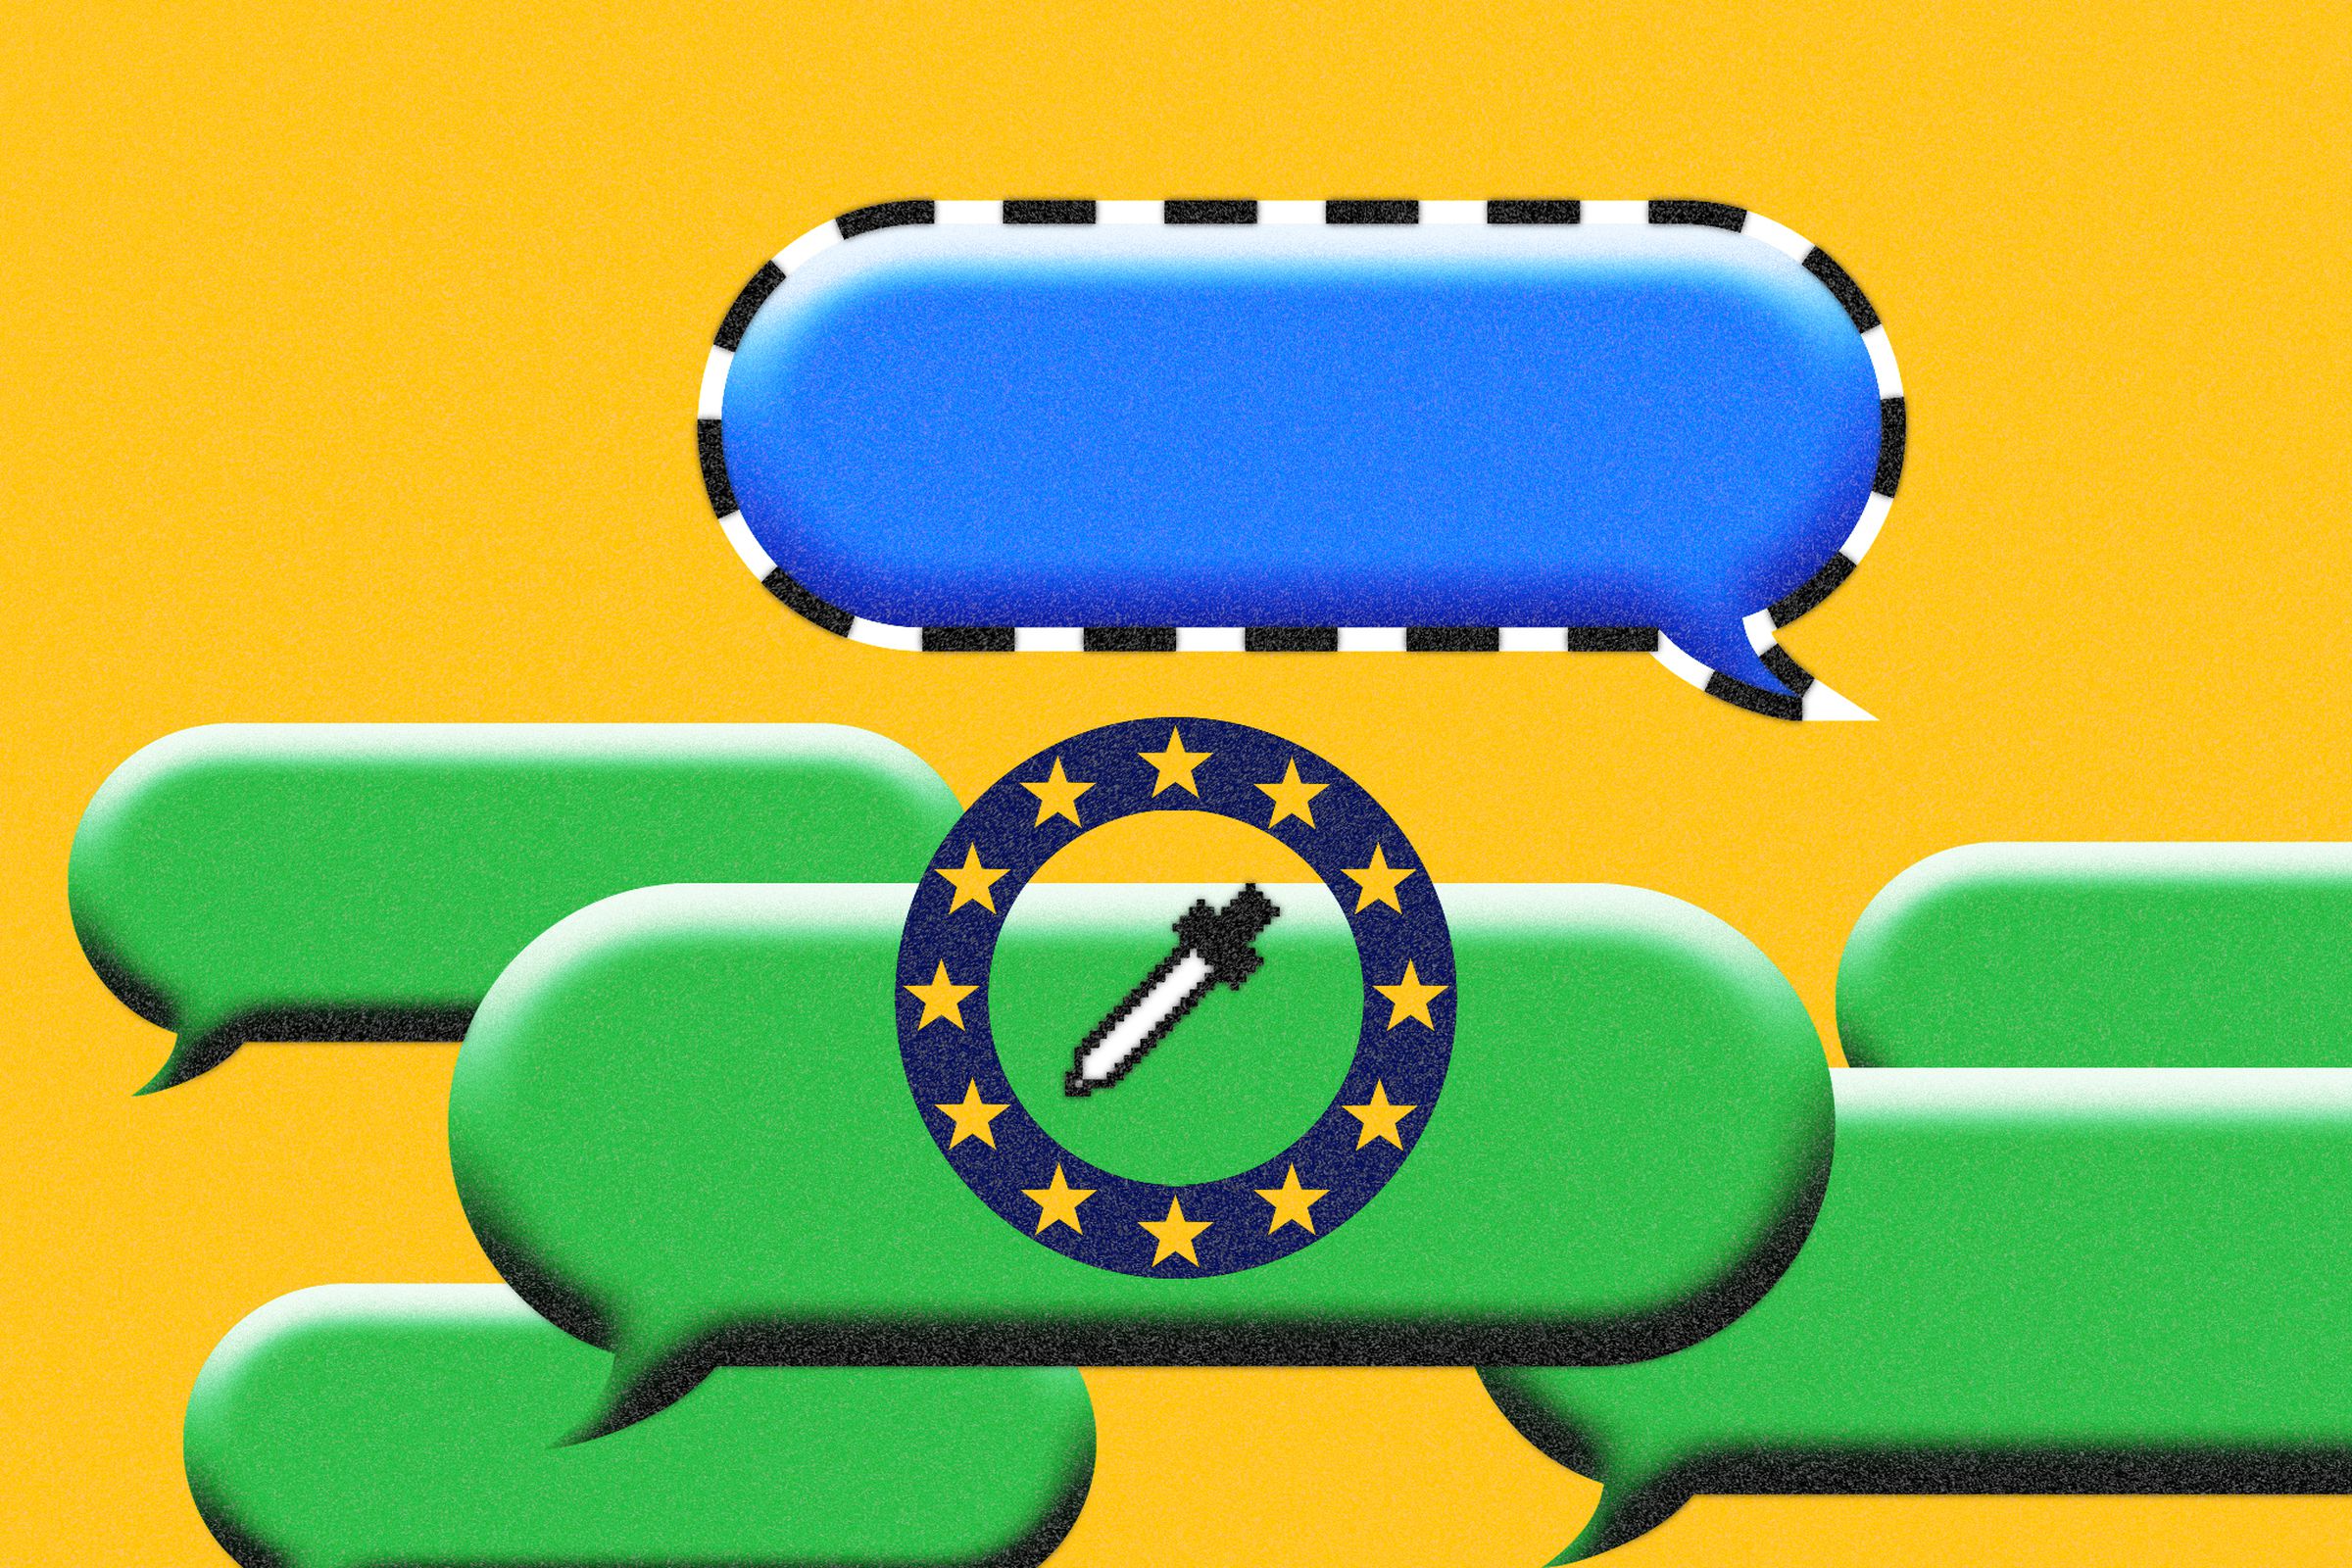 Illustration of a blue iMessage bubble selected to have its color changed by a digital colorpicker picking up the color green, to show the pressure on Apple to open up iMessage.